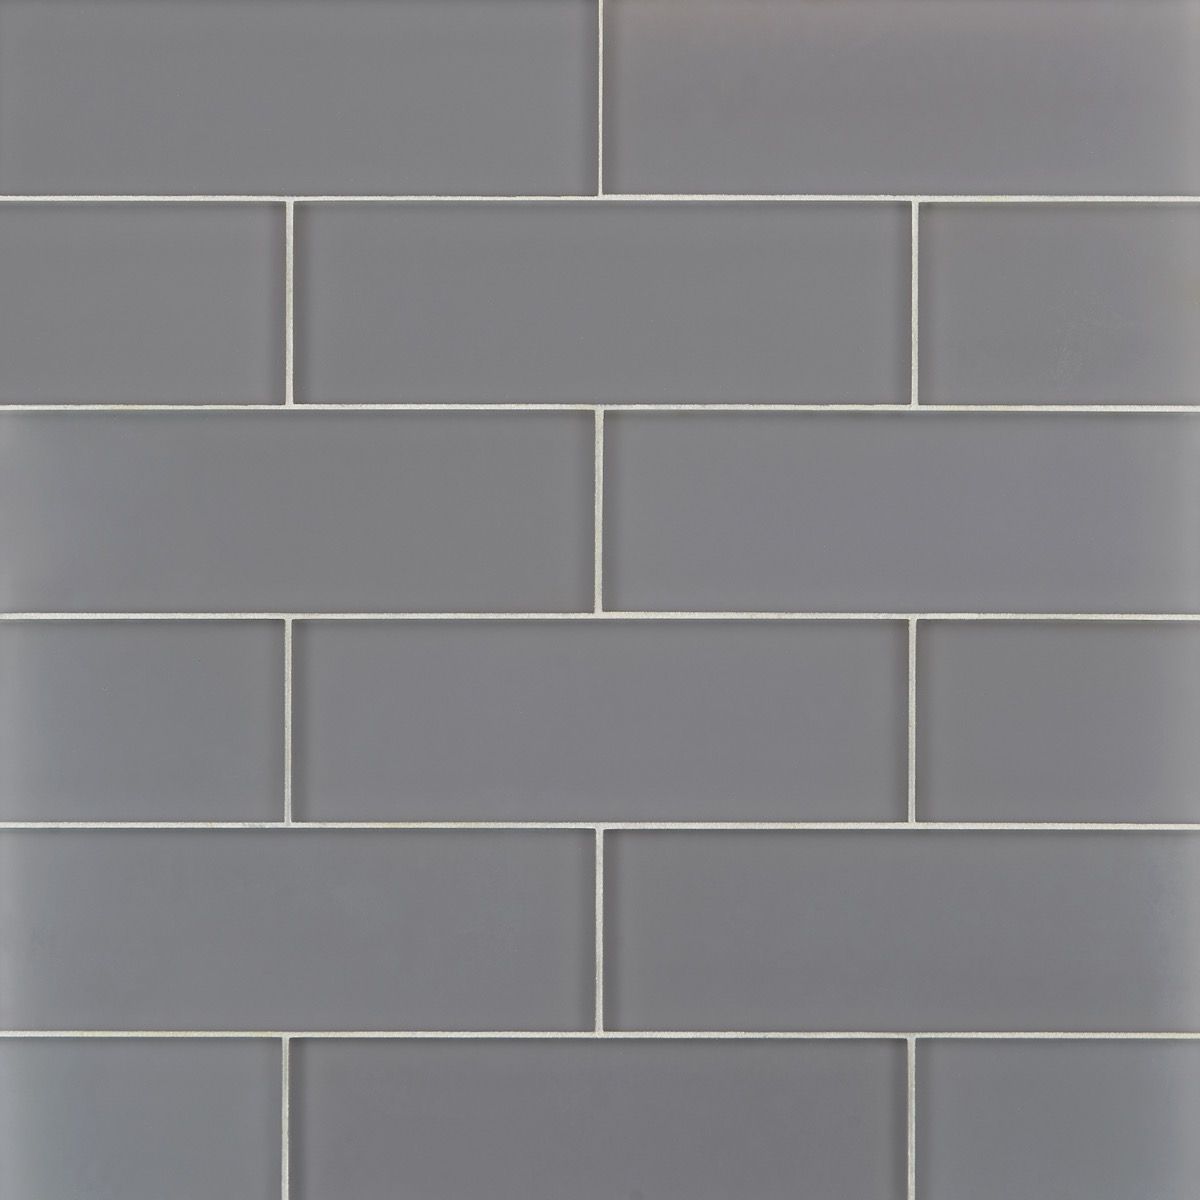 Shop For Loft Ash Gray Frosted 4 X 12 Glass Tiles At Tilebarcom